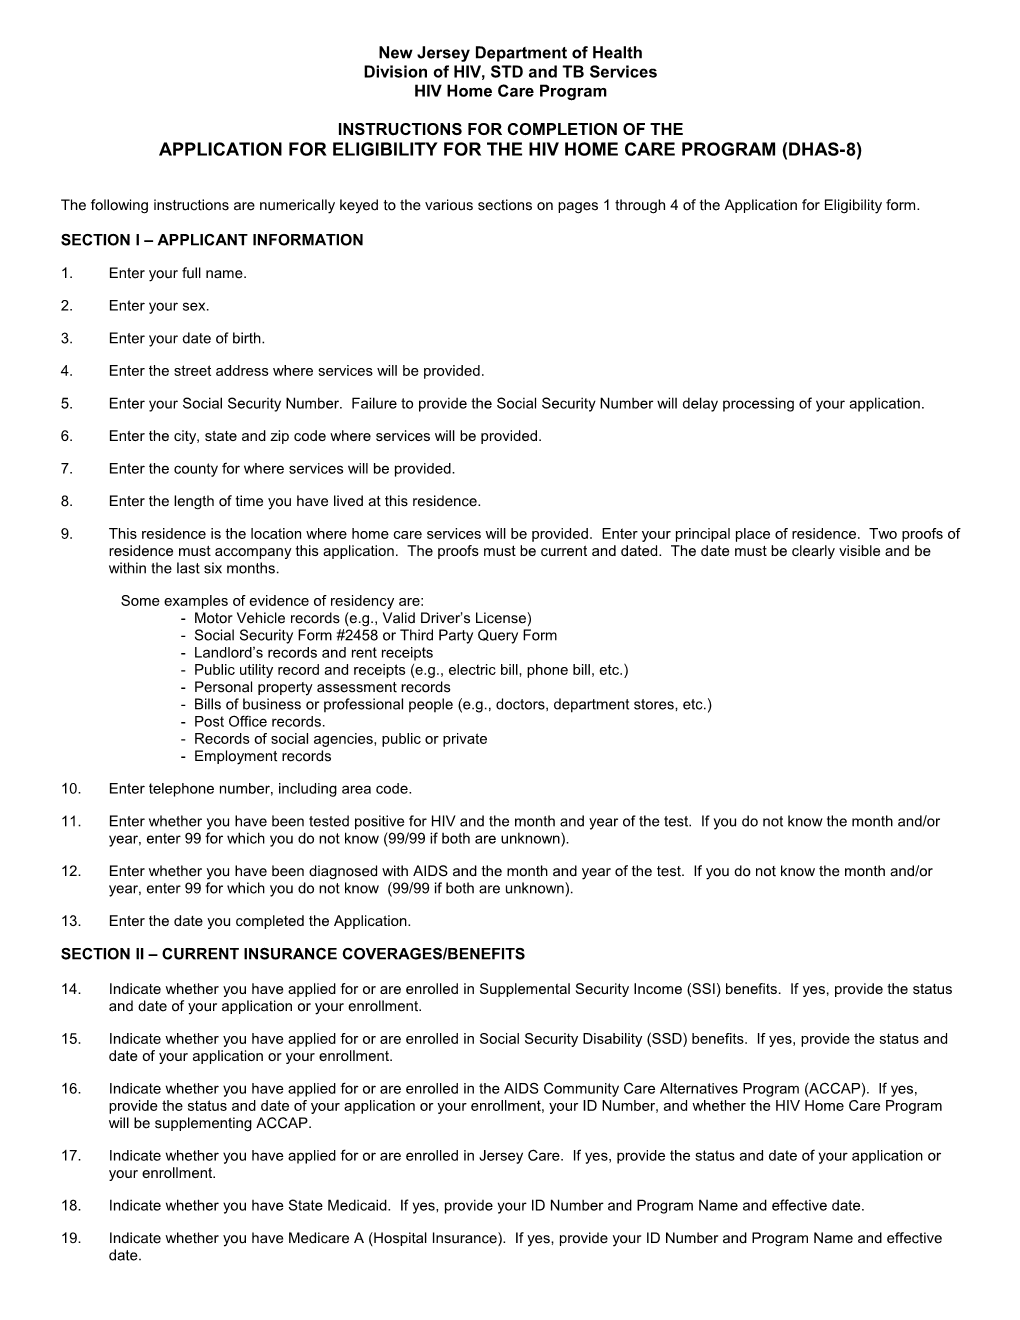 Instructions for Completion of the Application for Eligibility for the HIV Home Care Program